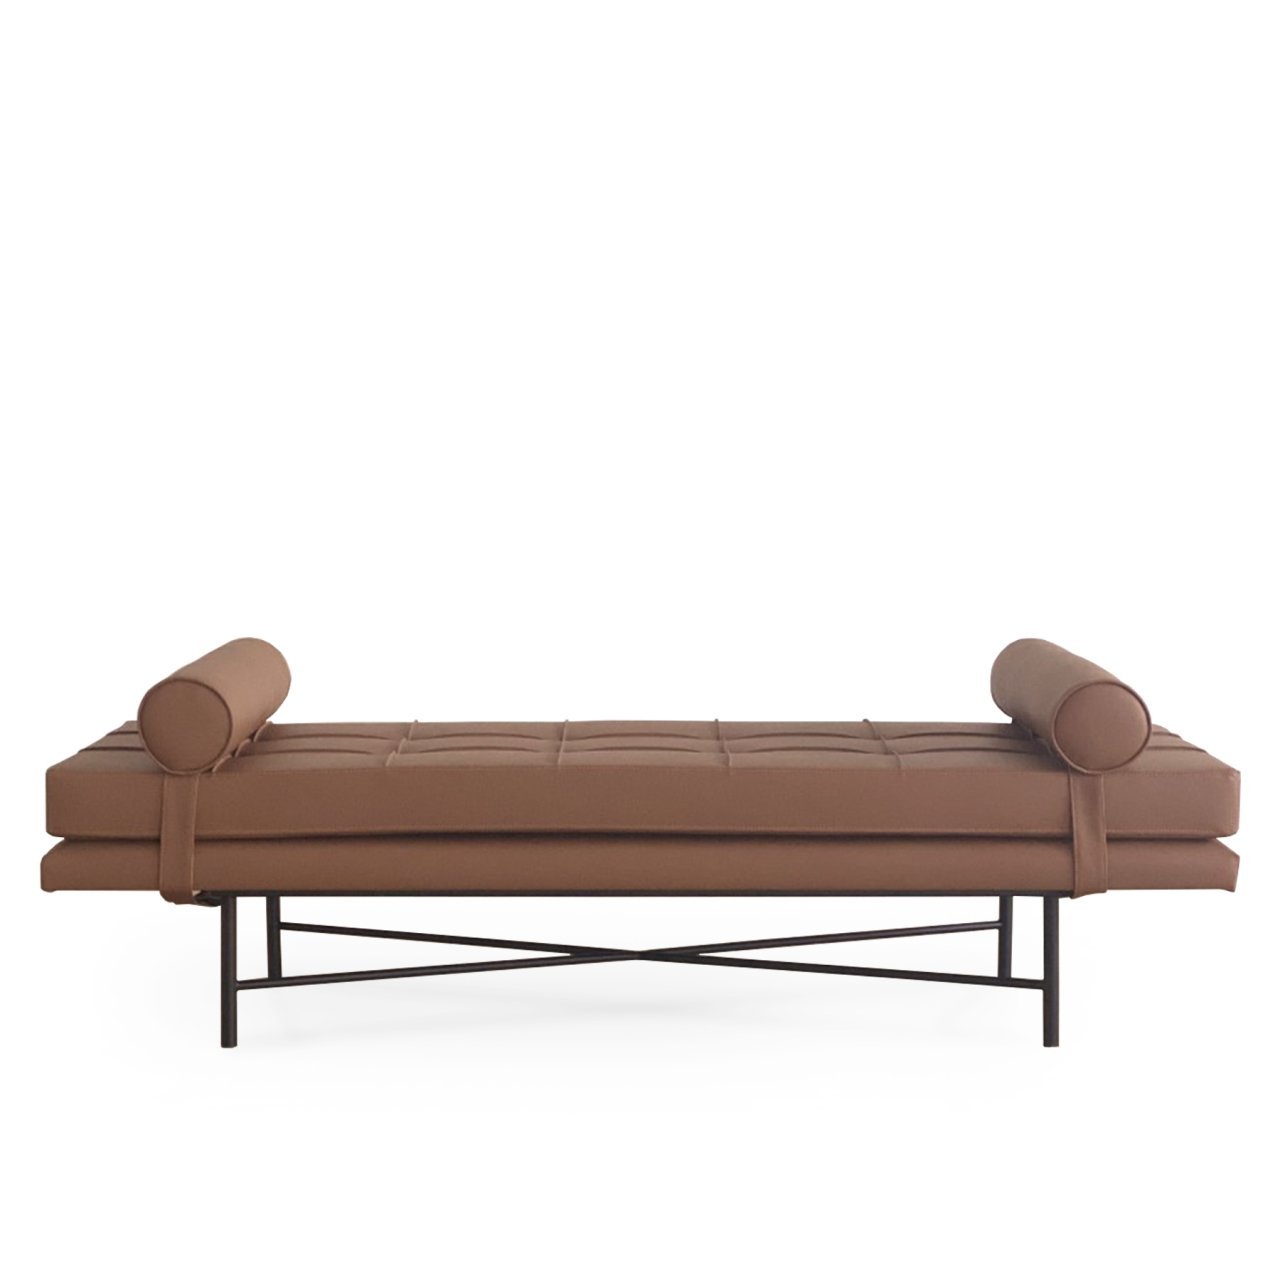 Sina Bench / Daybed